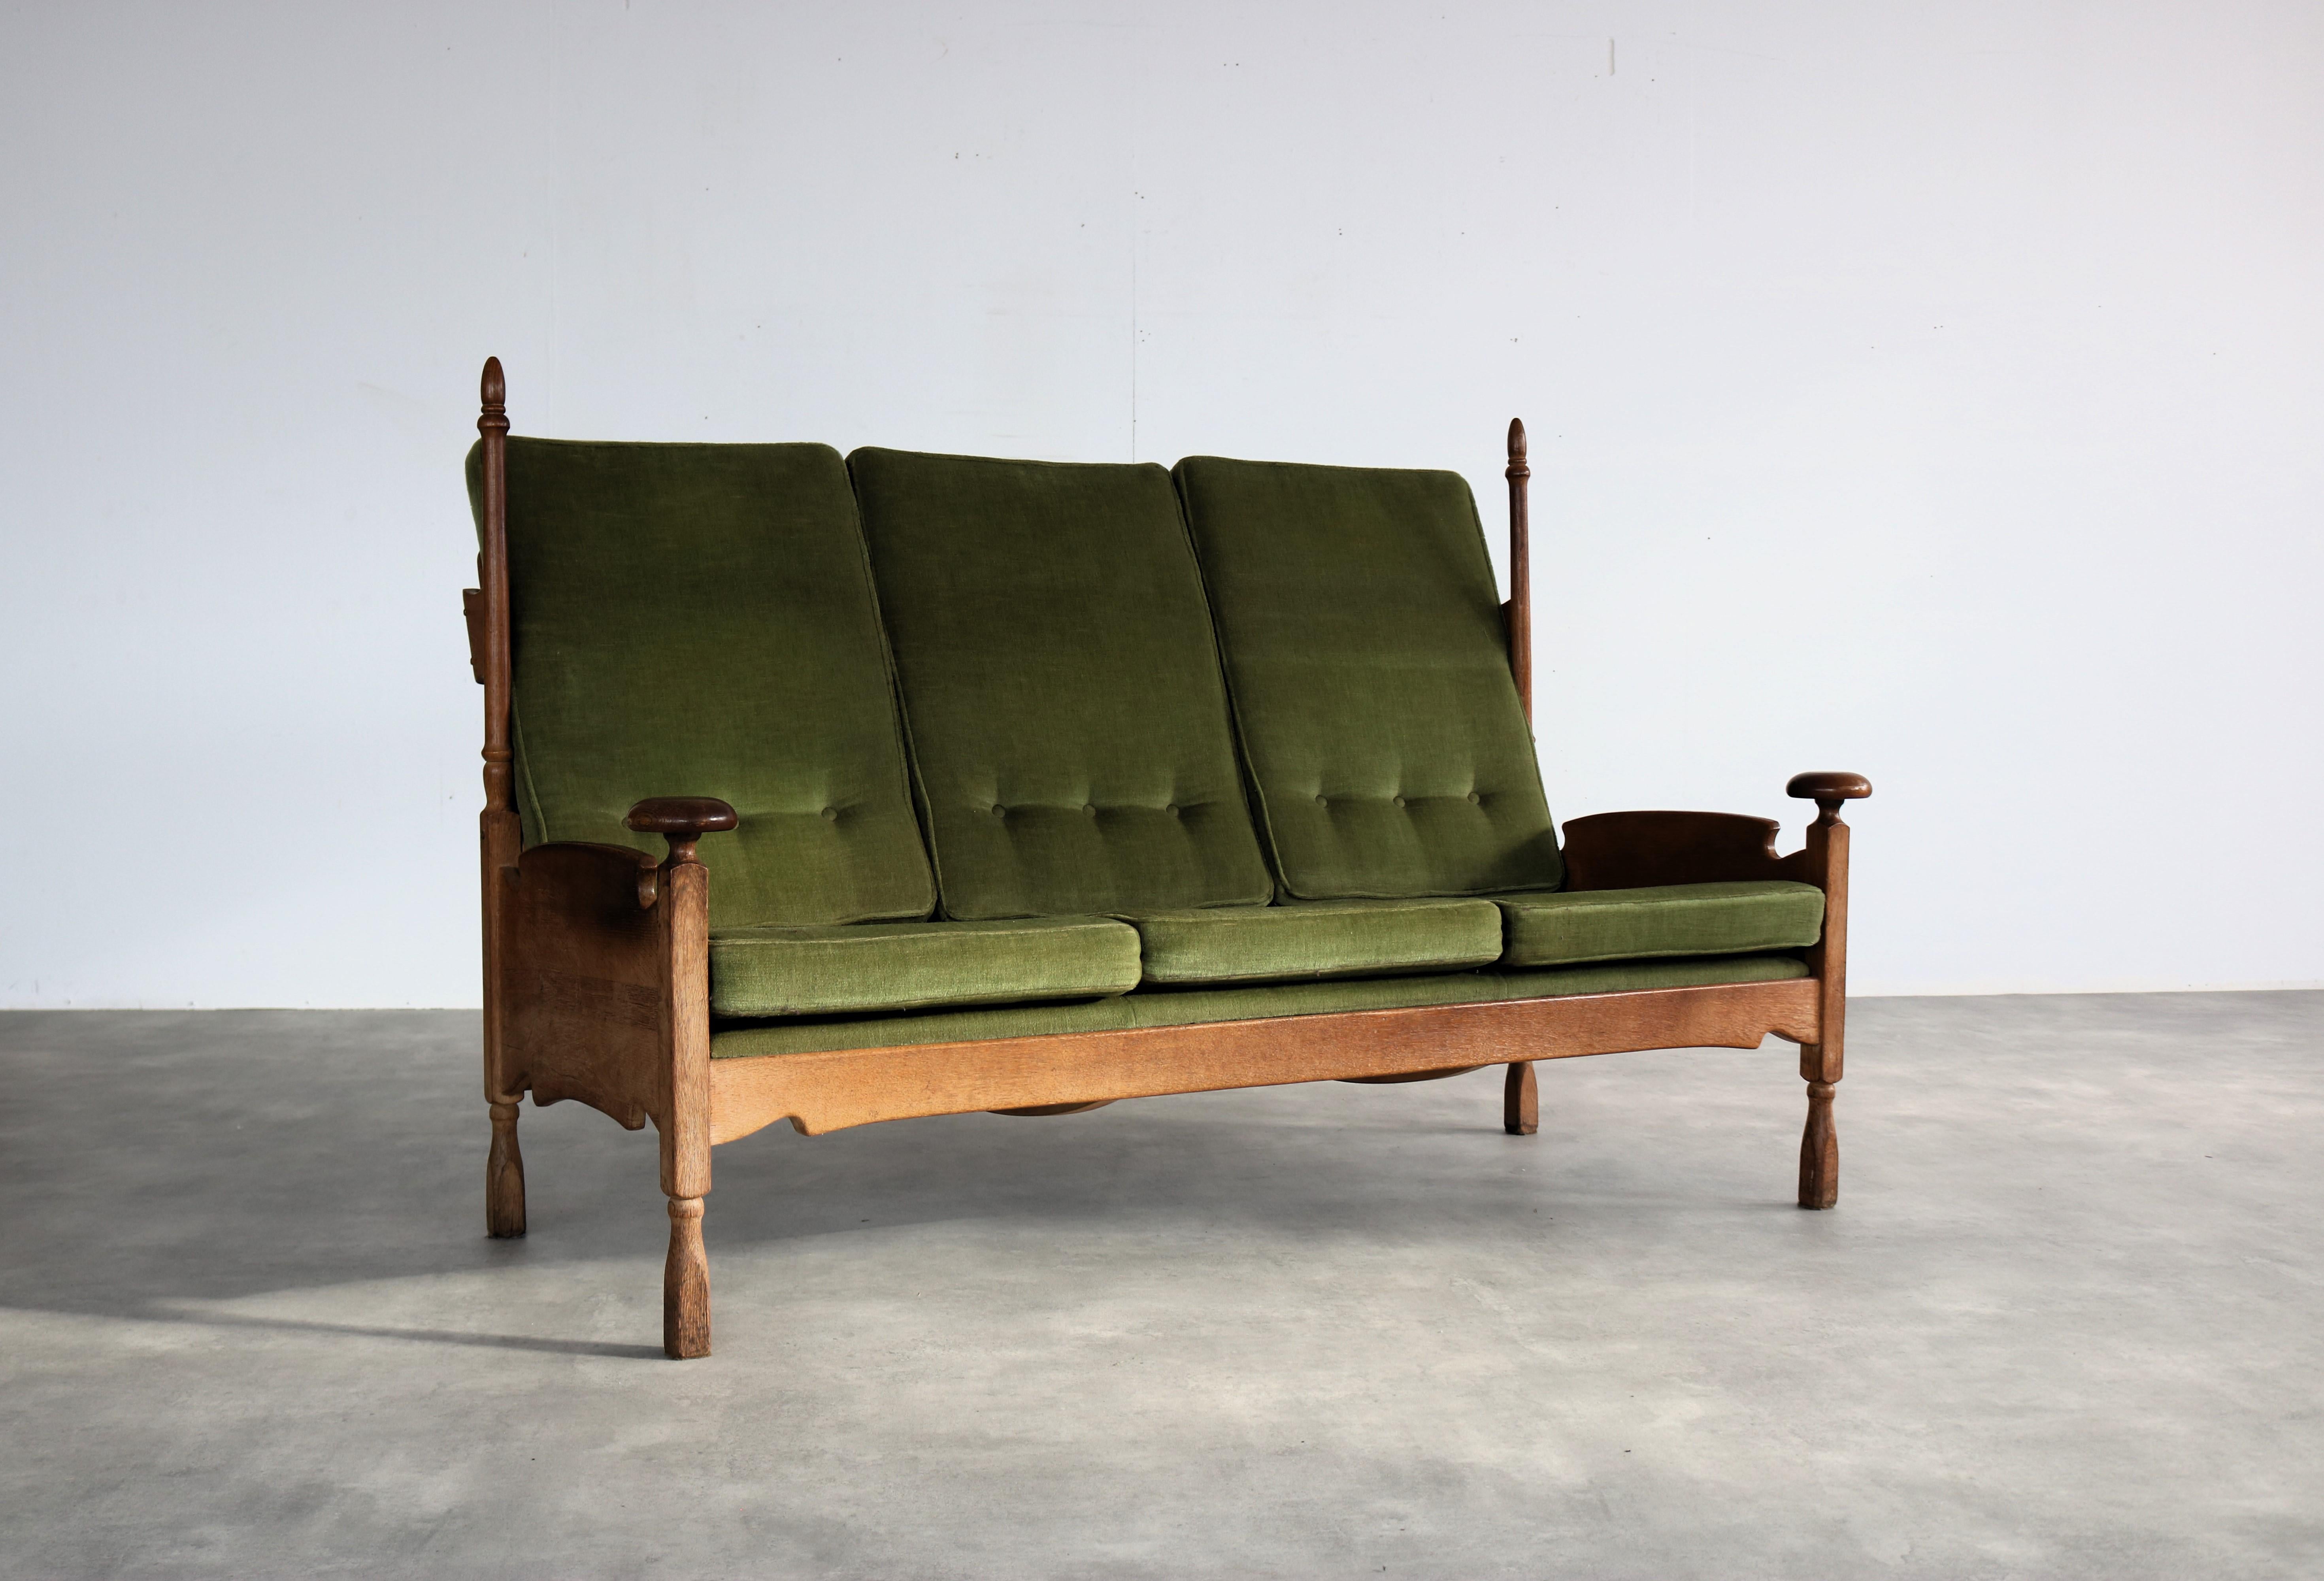 vintage sofa  bank  brutalist  1950s  Sweden

period  1950s
design  unknown  Sweden
condition  good  light signs of use
size  110 x 175 x 90 (hxwxd) seat height 45 cm;

details  oak; textile;

article number  2198